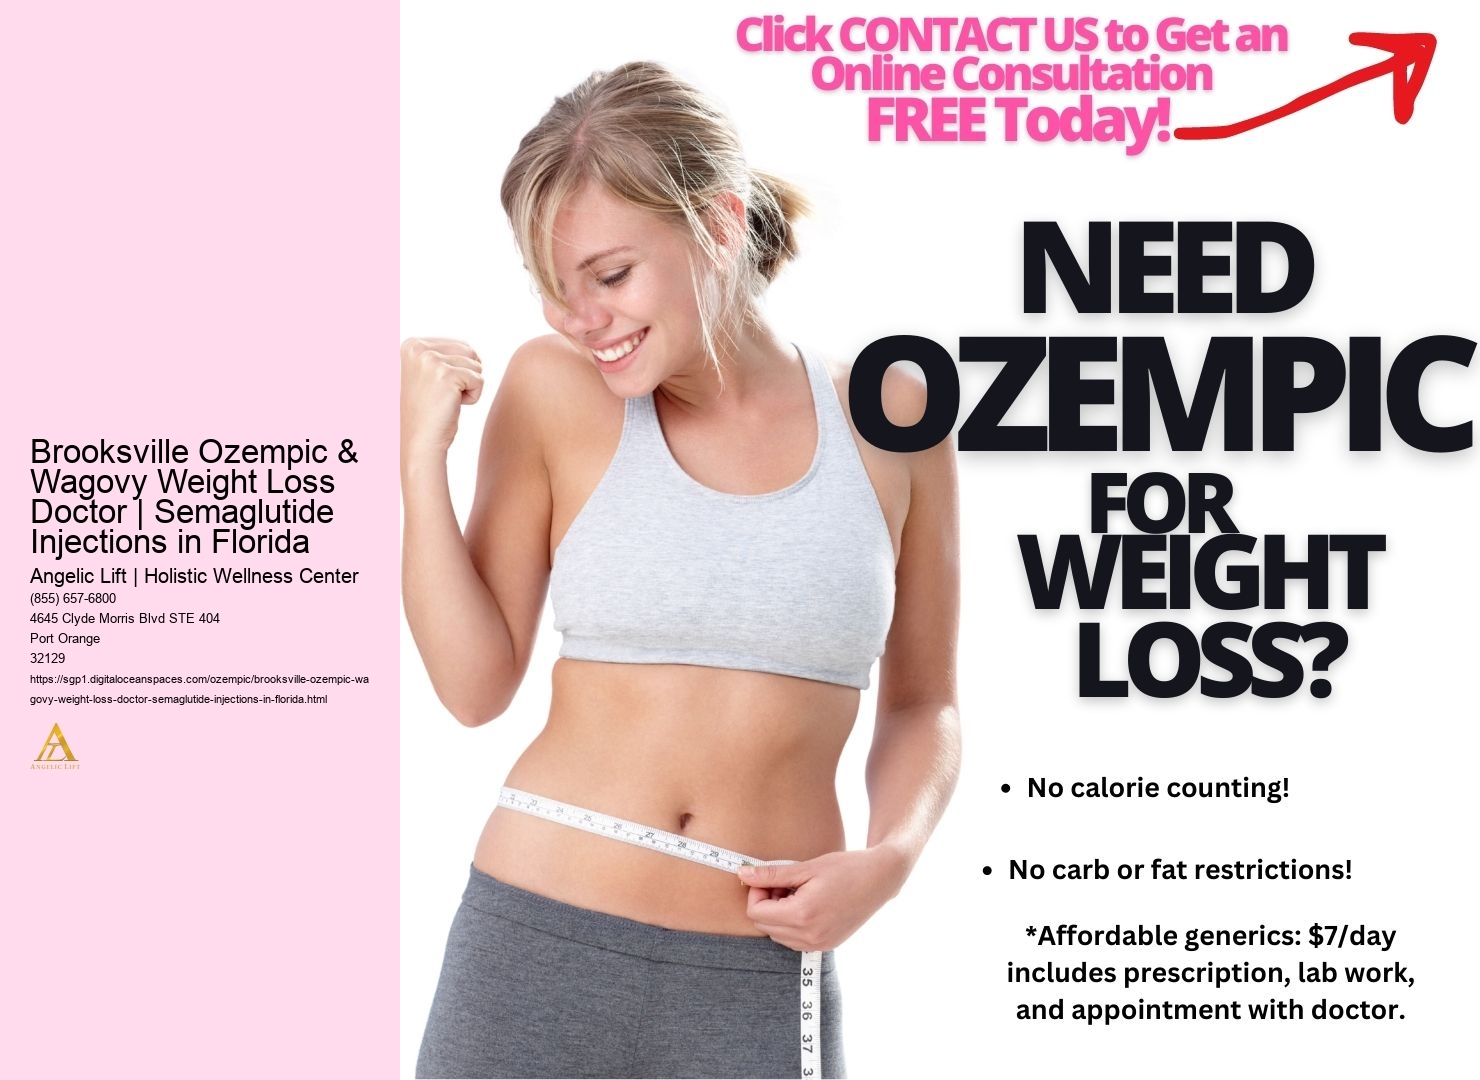 Brooksville Ozempic & Wagovy Weight Loss Doctor | Semaglutide Injections in Florida